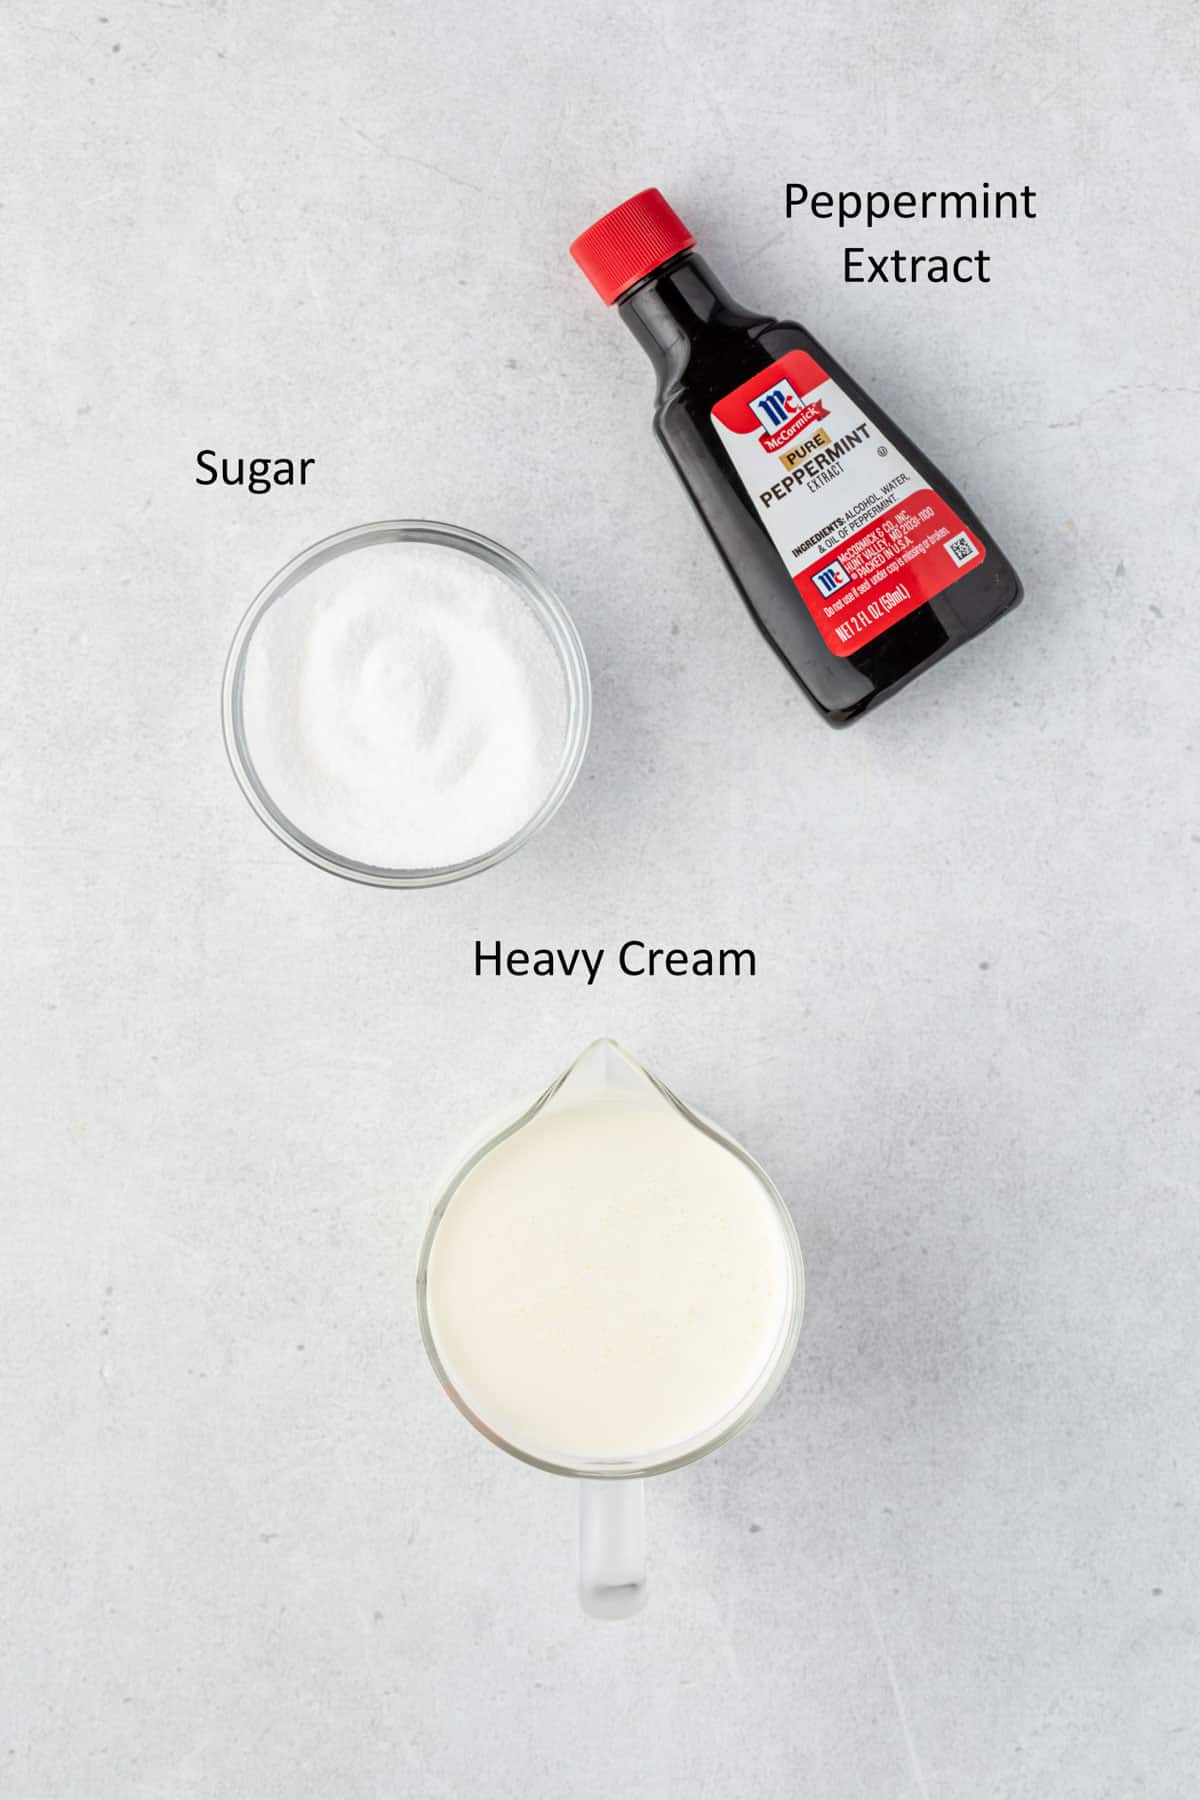 Whipping cream, bowl of sugar, and bottle of peppermint extract.